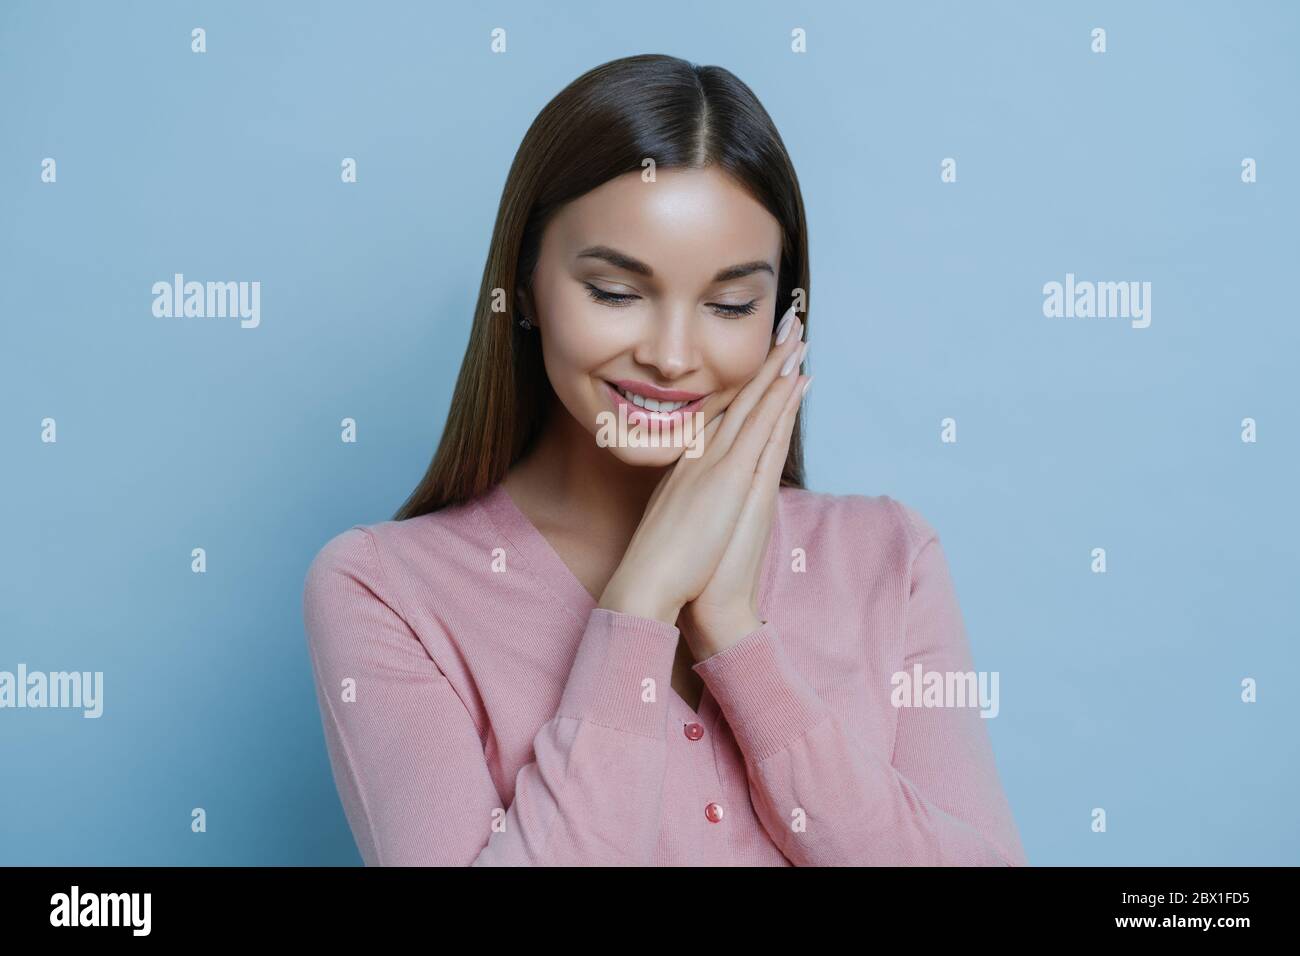 Portrait of glad shy woman keeps hands pressed together near face, concentrated down, pleased to hear compliment, has charming expression, has flirtin Stock Photo